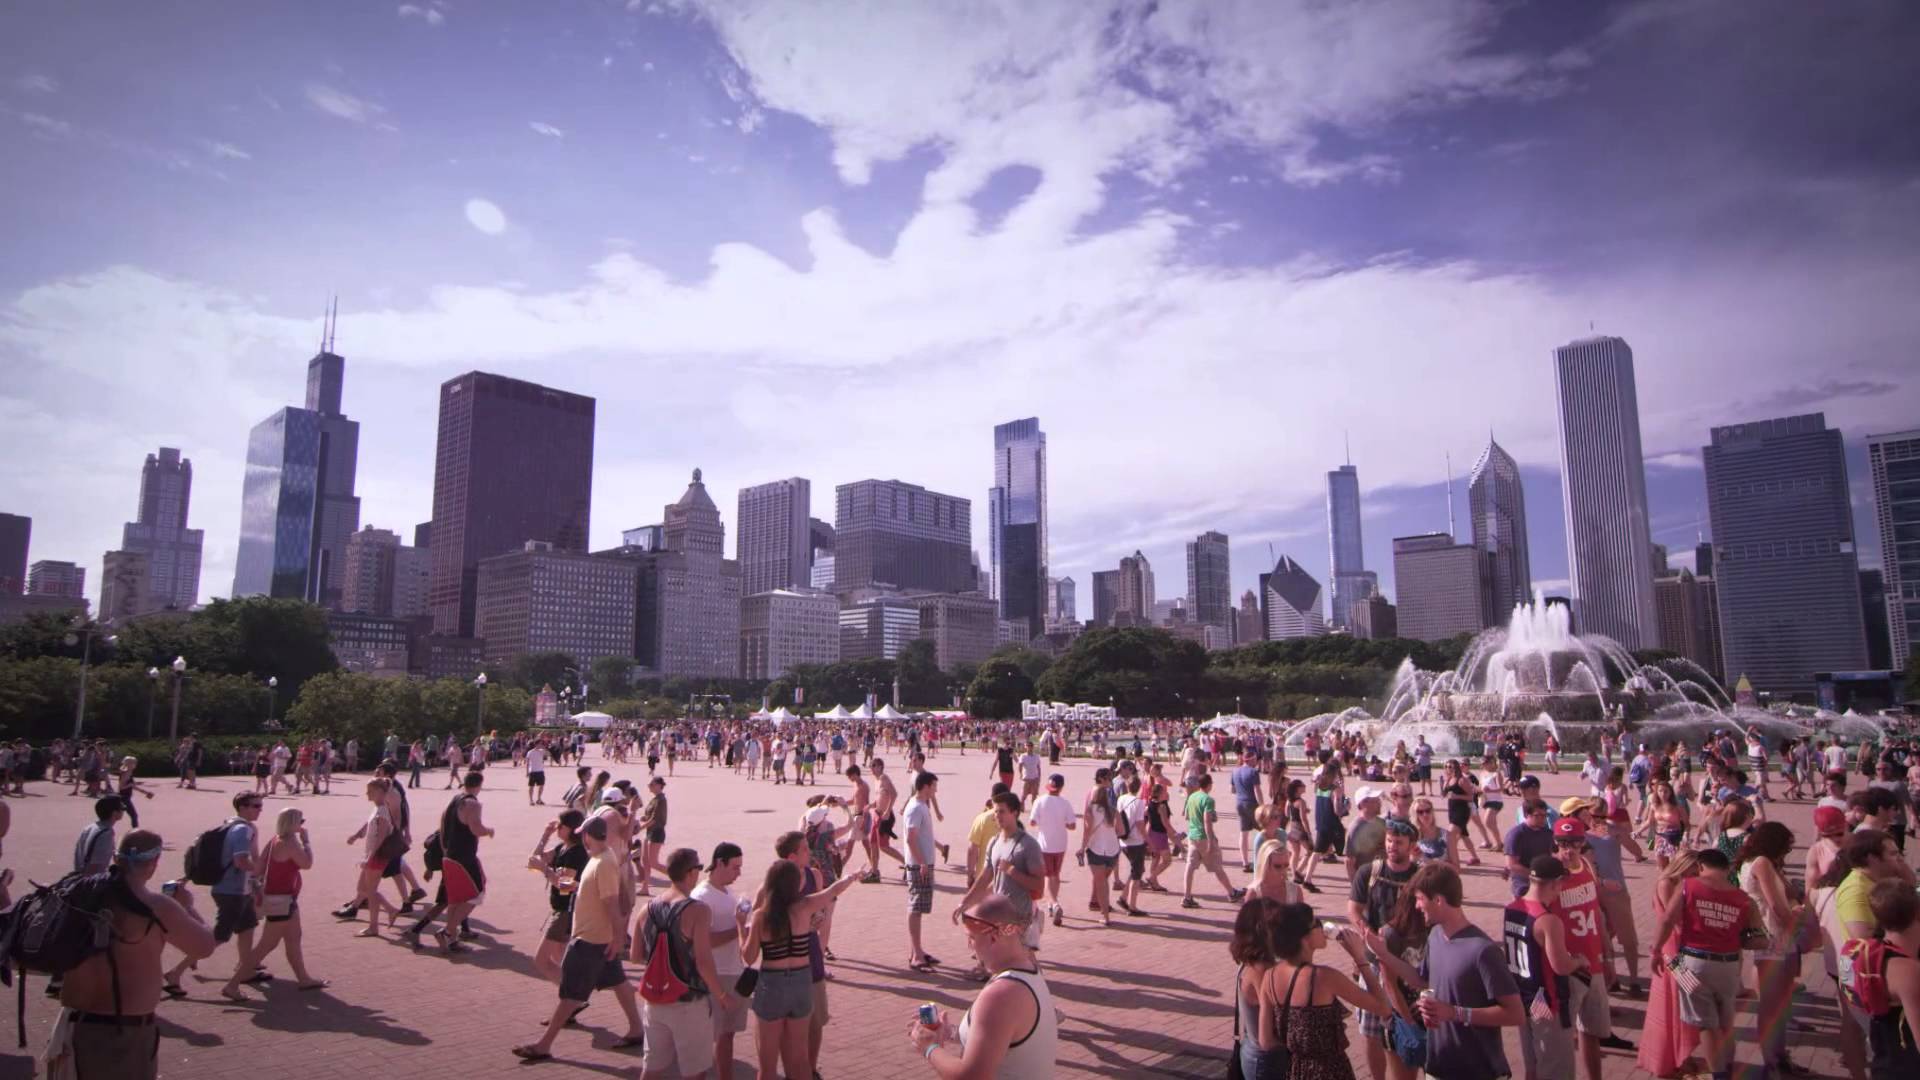 Get Ready for 2014! Watch & Relive the Lollapalooza 2013 Magic